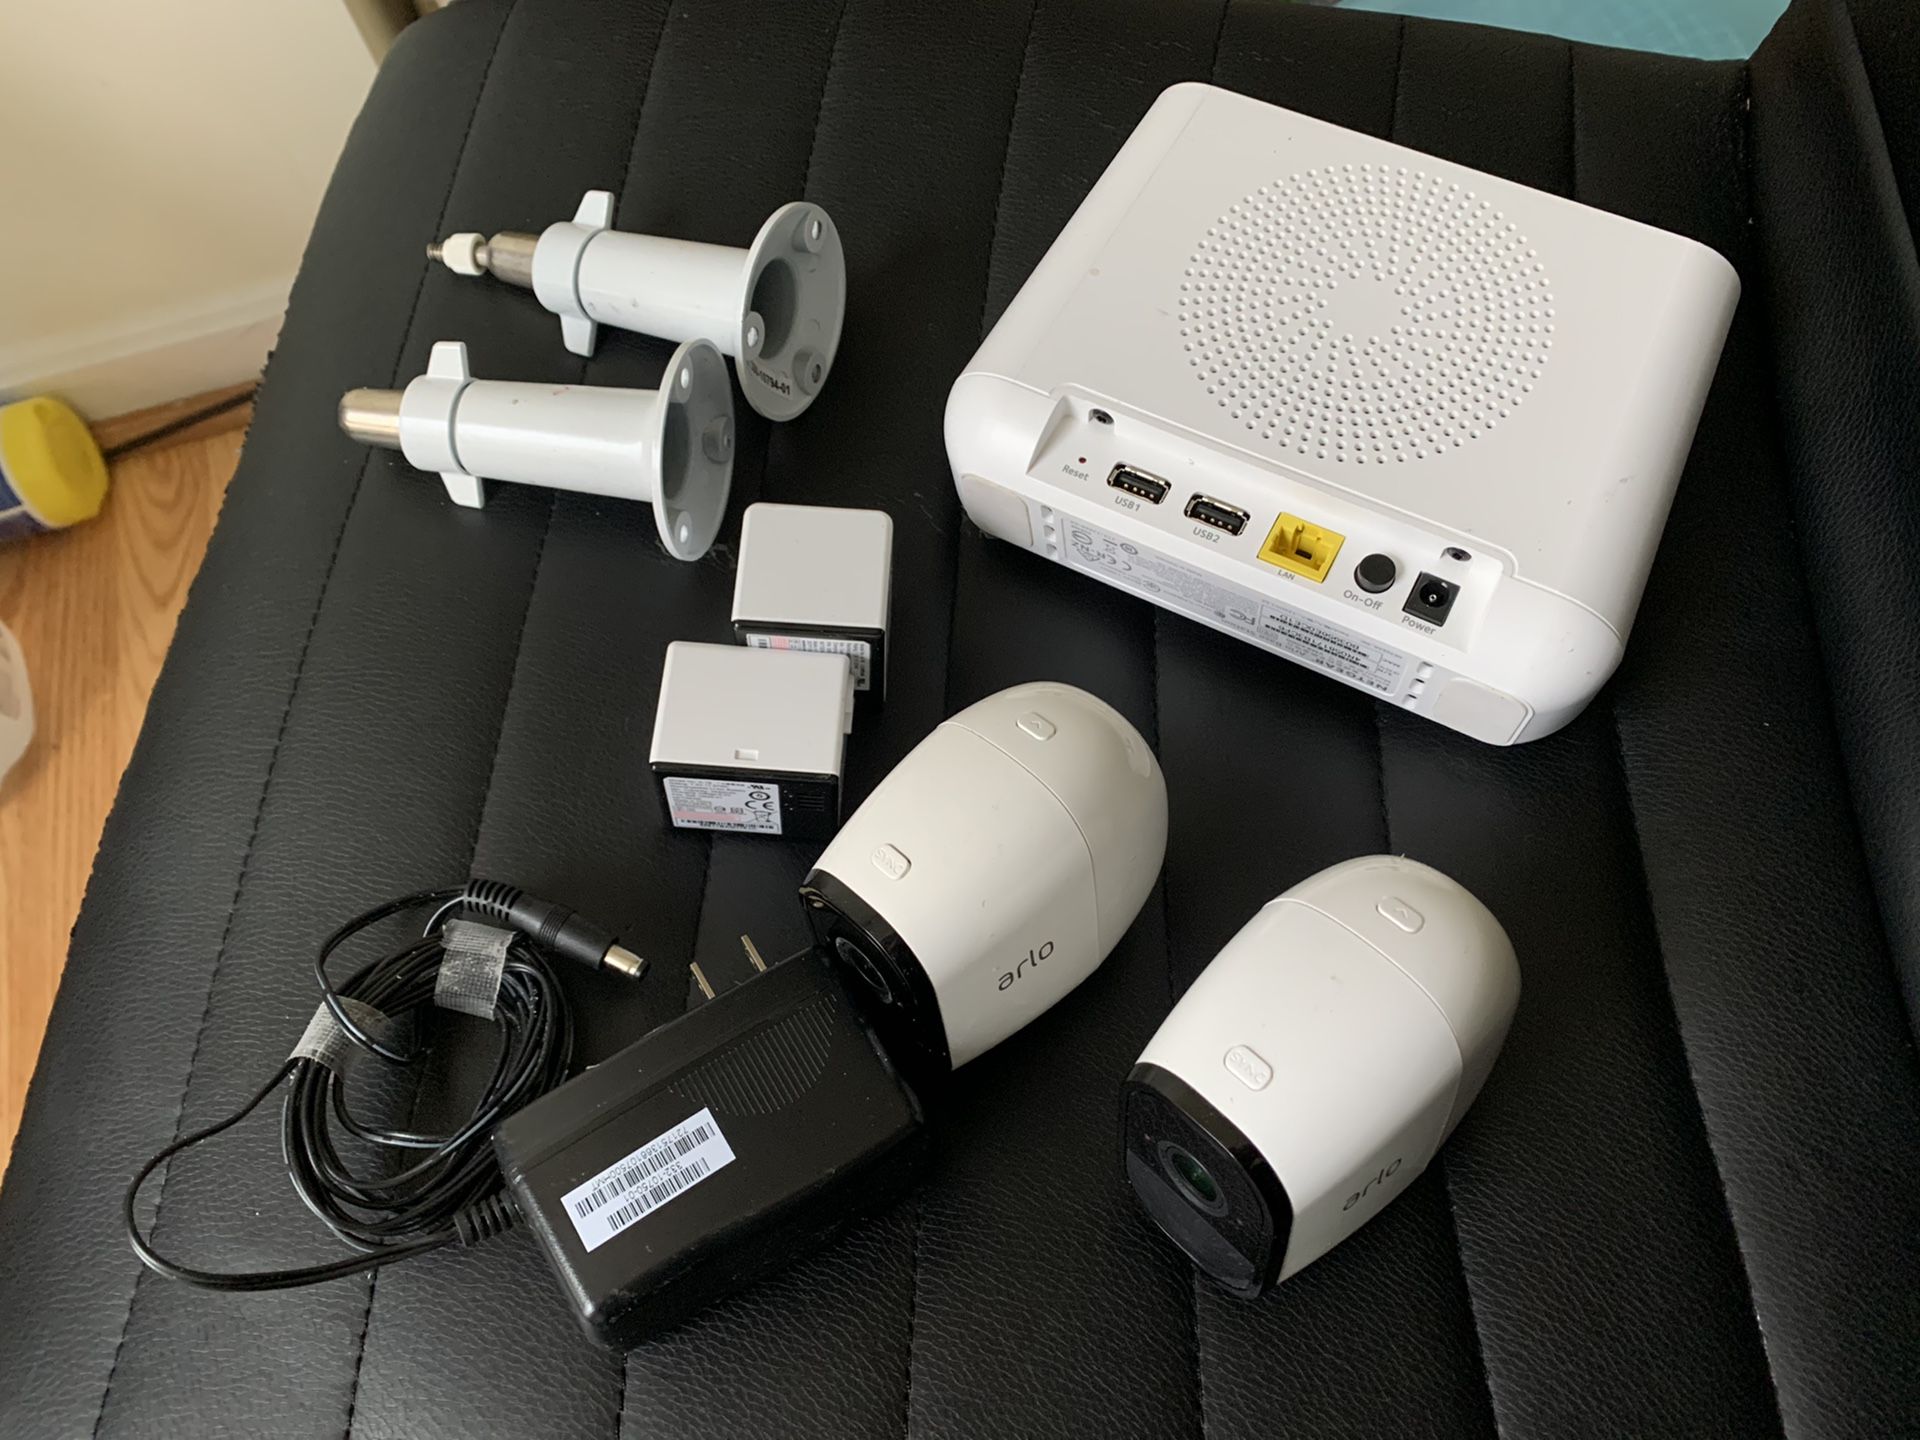 Arlo Pro 2 home security kit